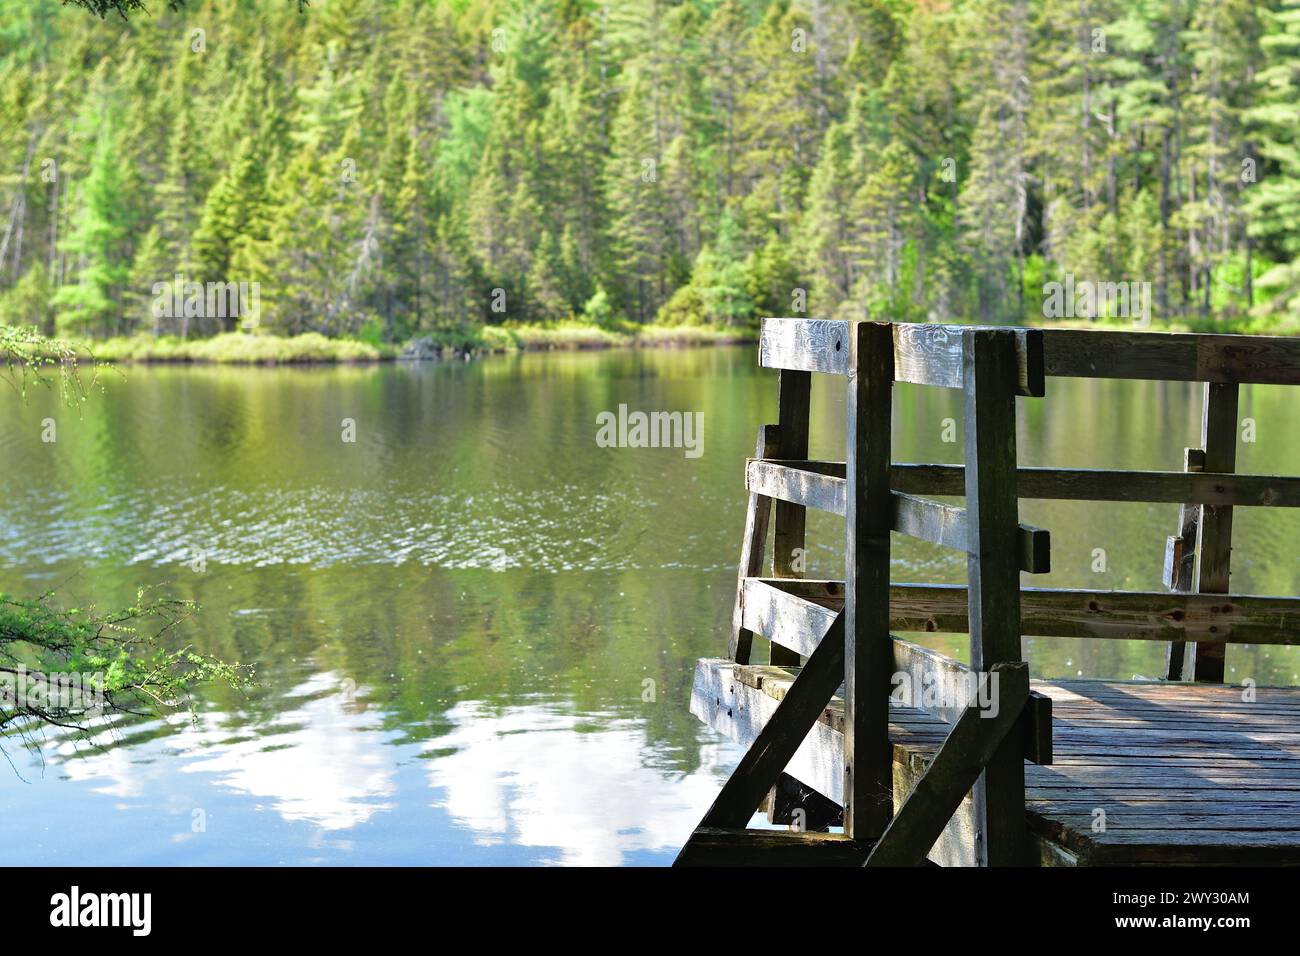 Observatory platform on lake side. Calm lake with wood platfrom. Stock Photo